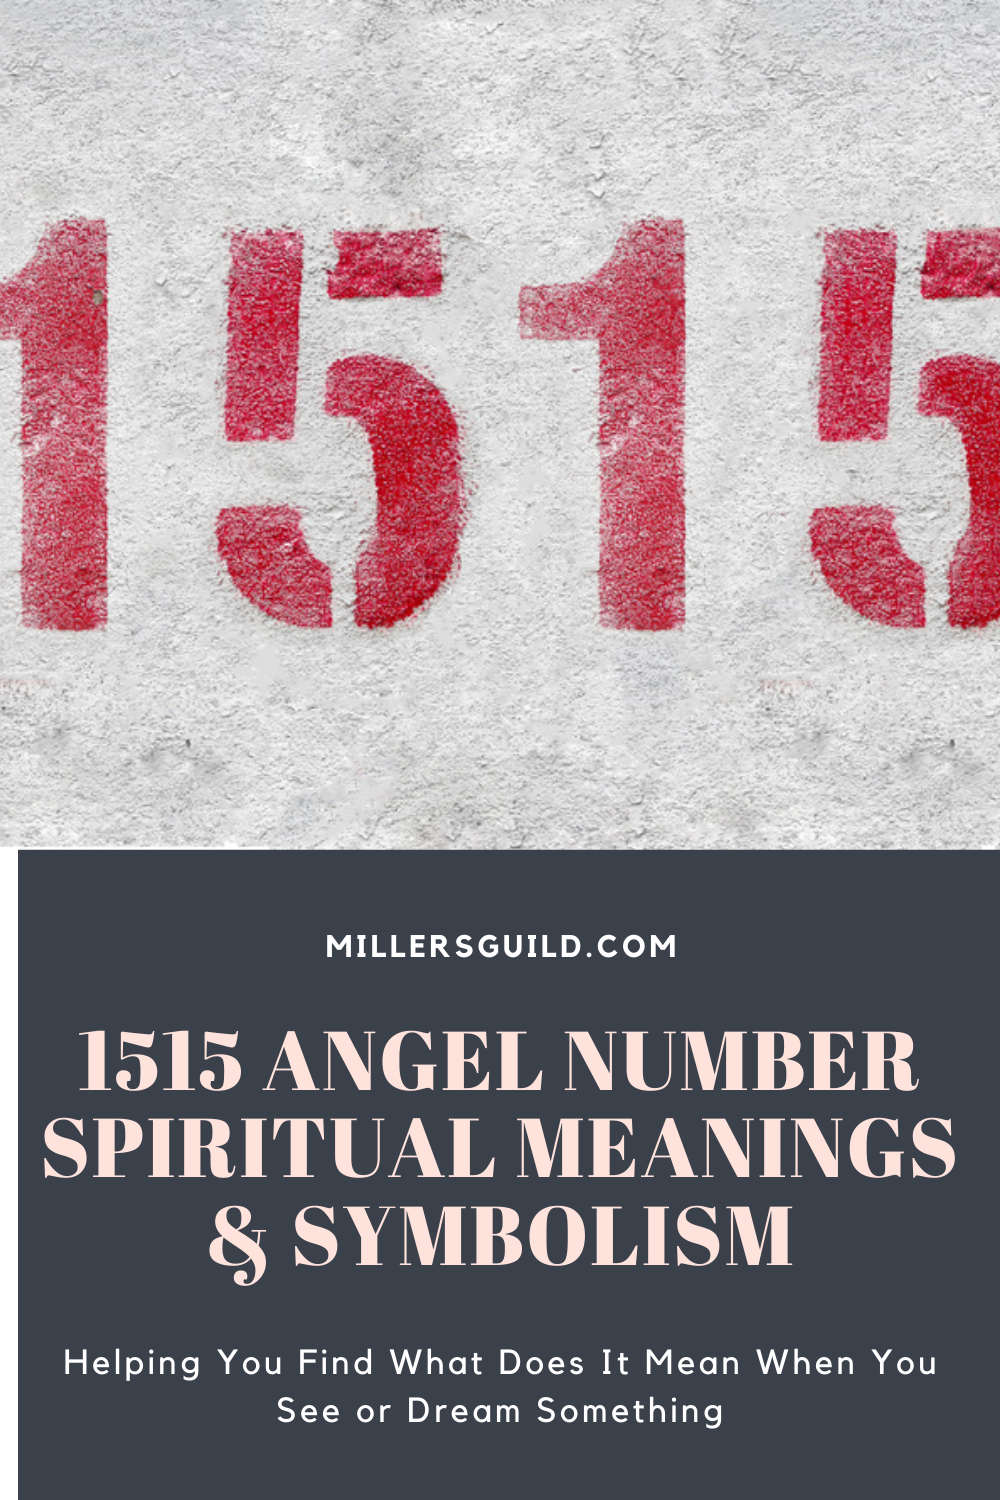 1515 Angel Number Spiritual Meanings & Symbolism 1